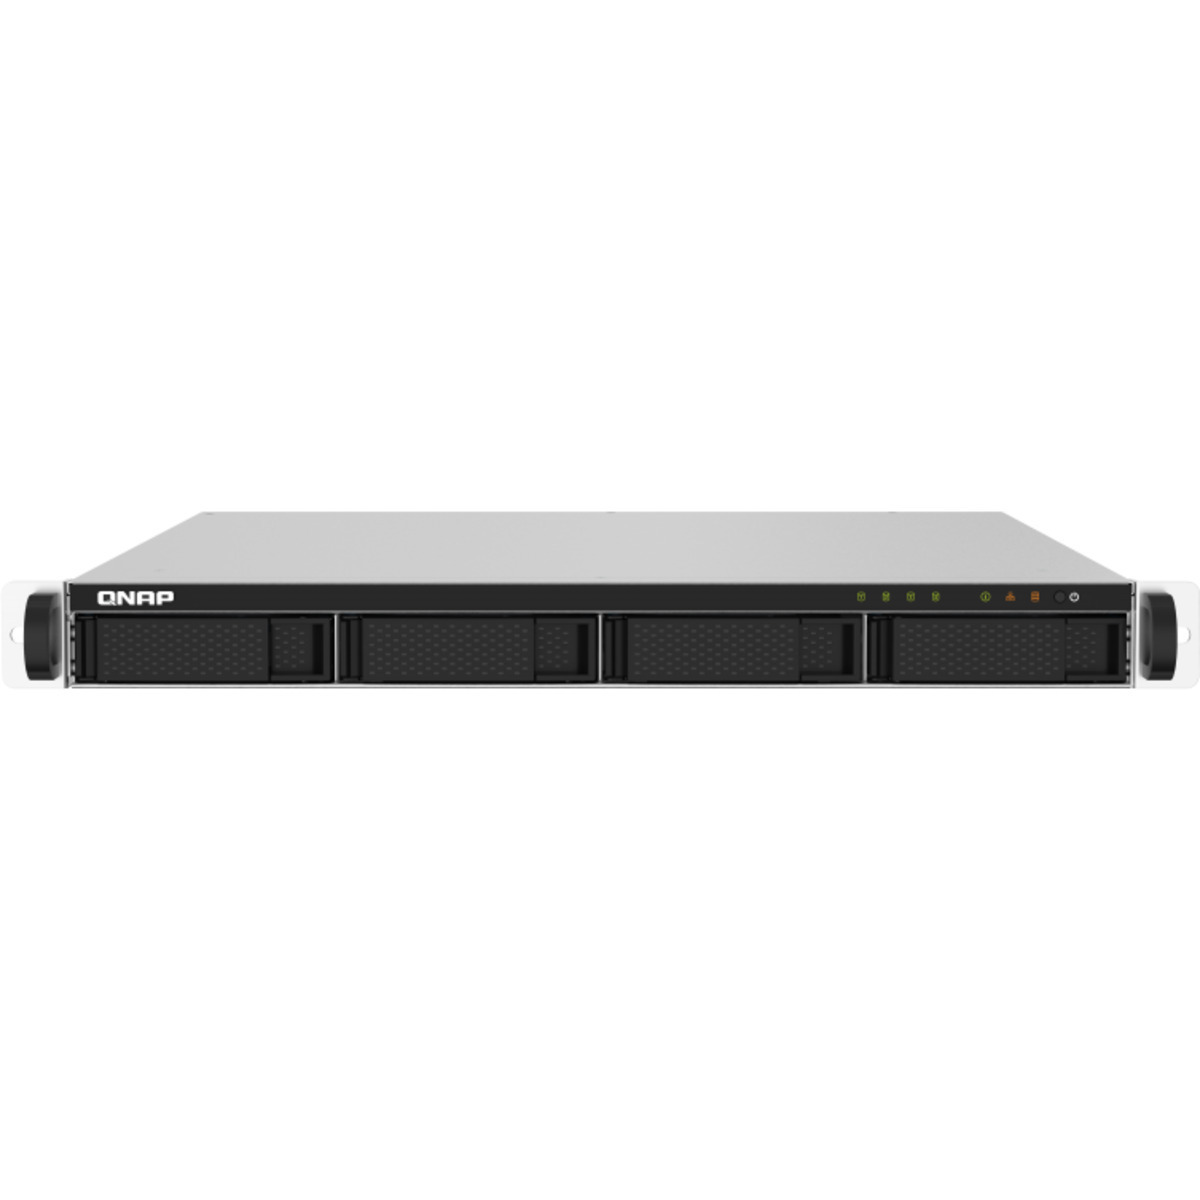 QNAP TS-432PXU 36tb 4-Bay RackMount Personal / Basic Home / Small Office NAS - Network Attached Storage Device 2x18tb Western Digital Gold WD181KRYZ 3.5 7200rpm SATA 6Gb/s HDD ENTERPRISE Class Drives Installed - Burn-In Tested - FREE RAM UPGRADE TS-432PXU